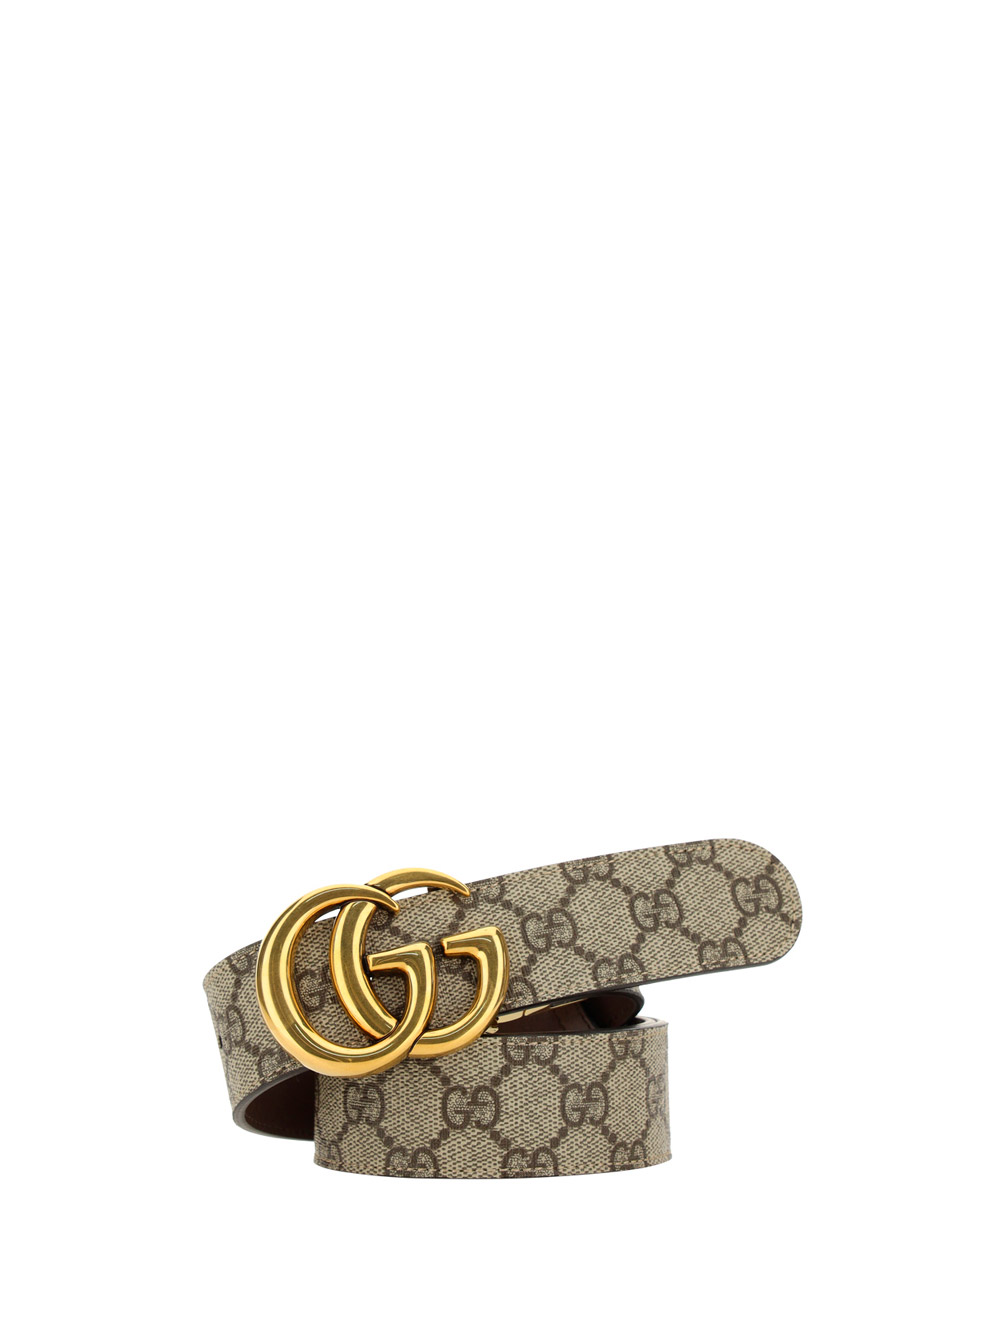 Gucci Belt In Be.ebo/new Acero